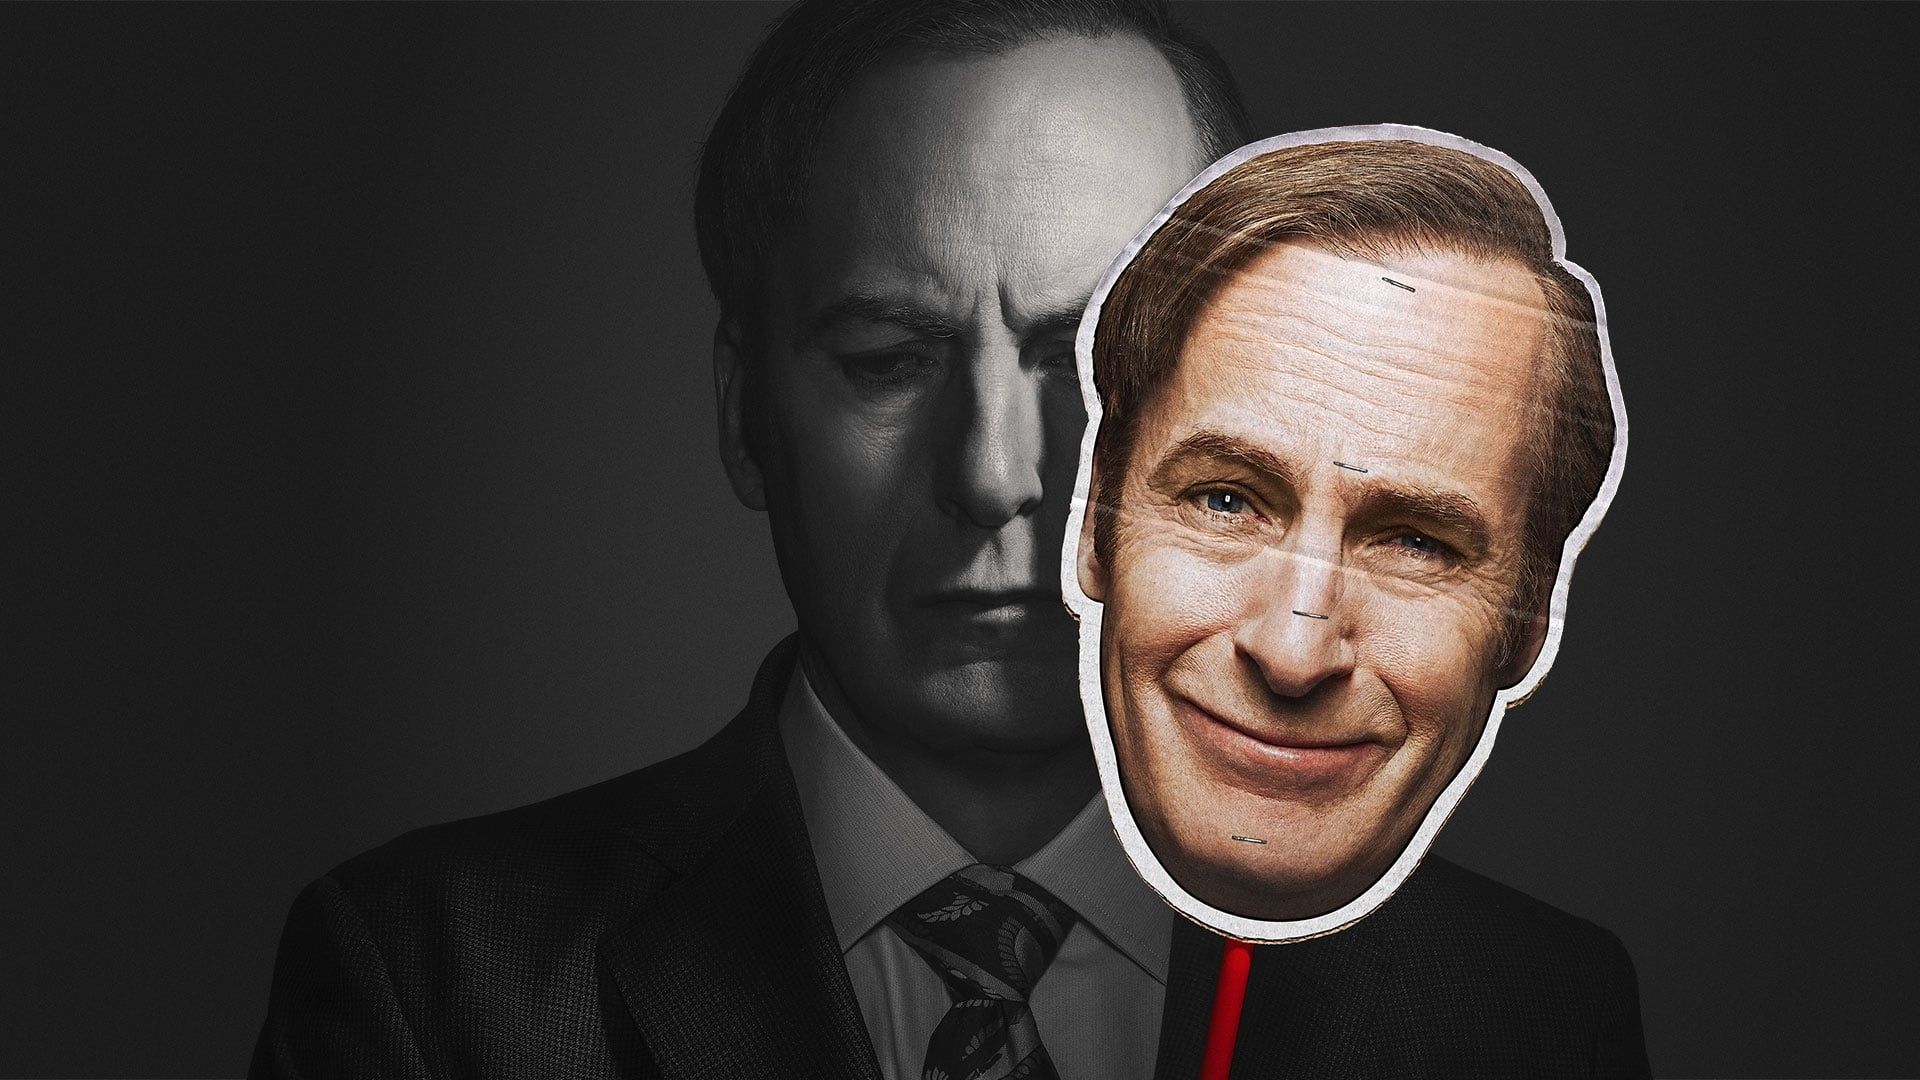 Better Call Saul background